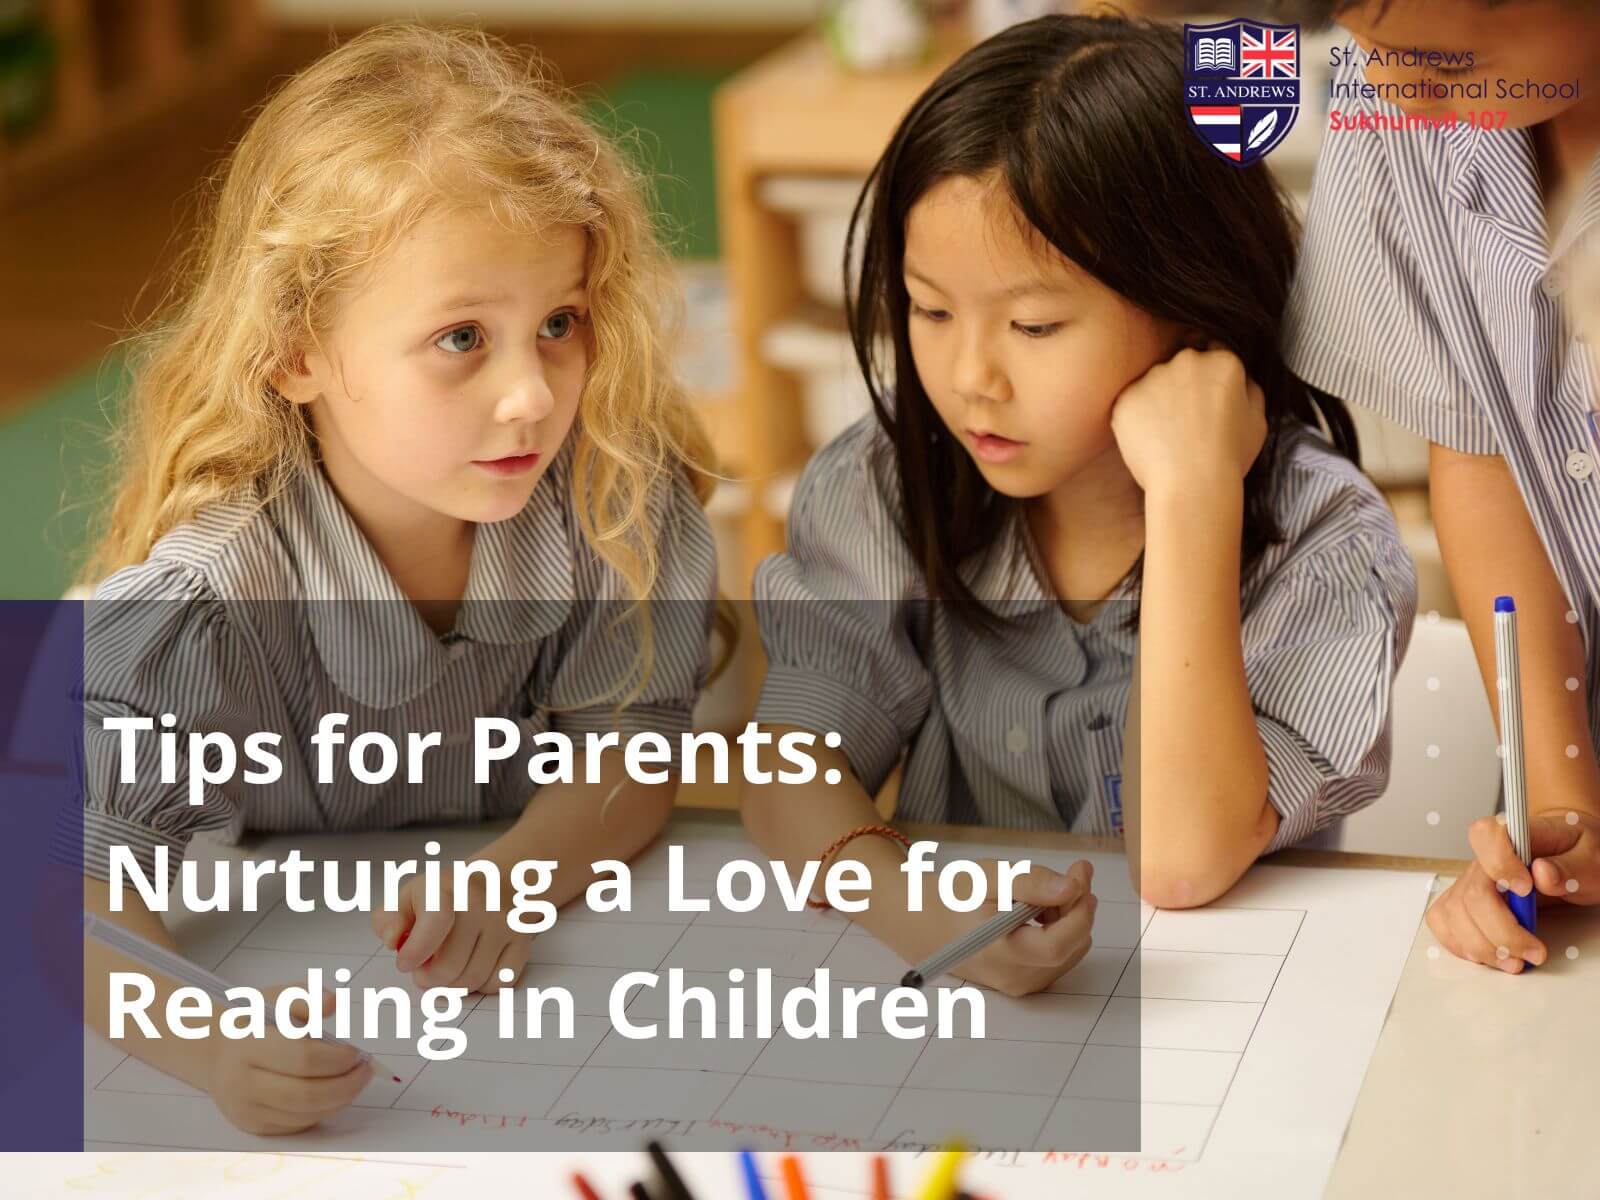 Tips for Parents Nurturing a Love for Reading in Children